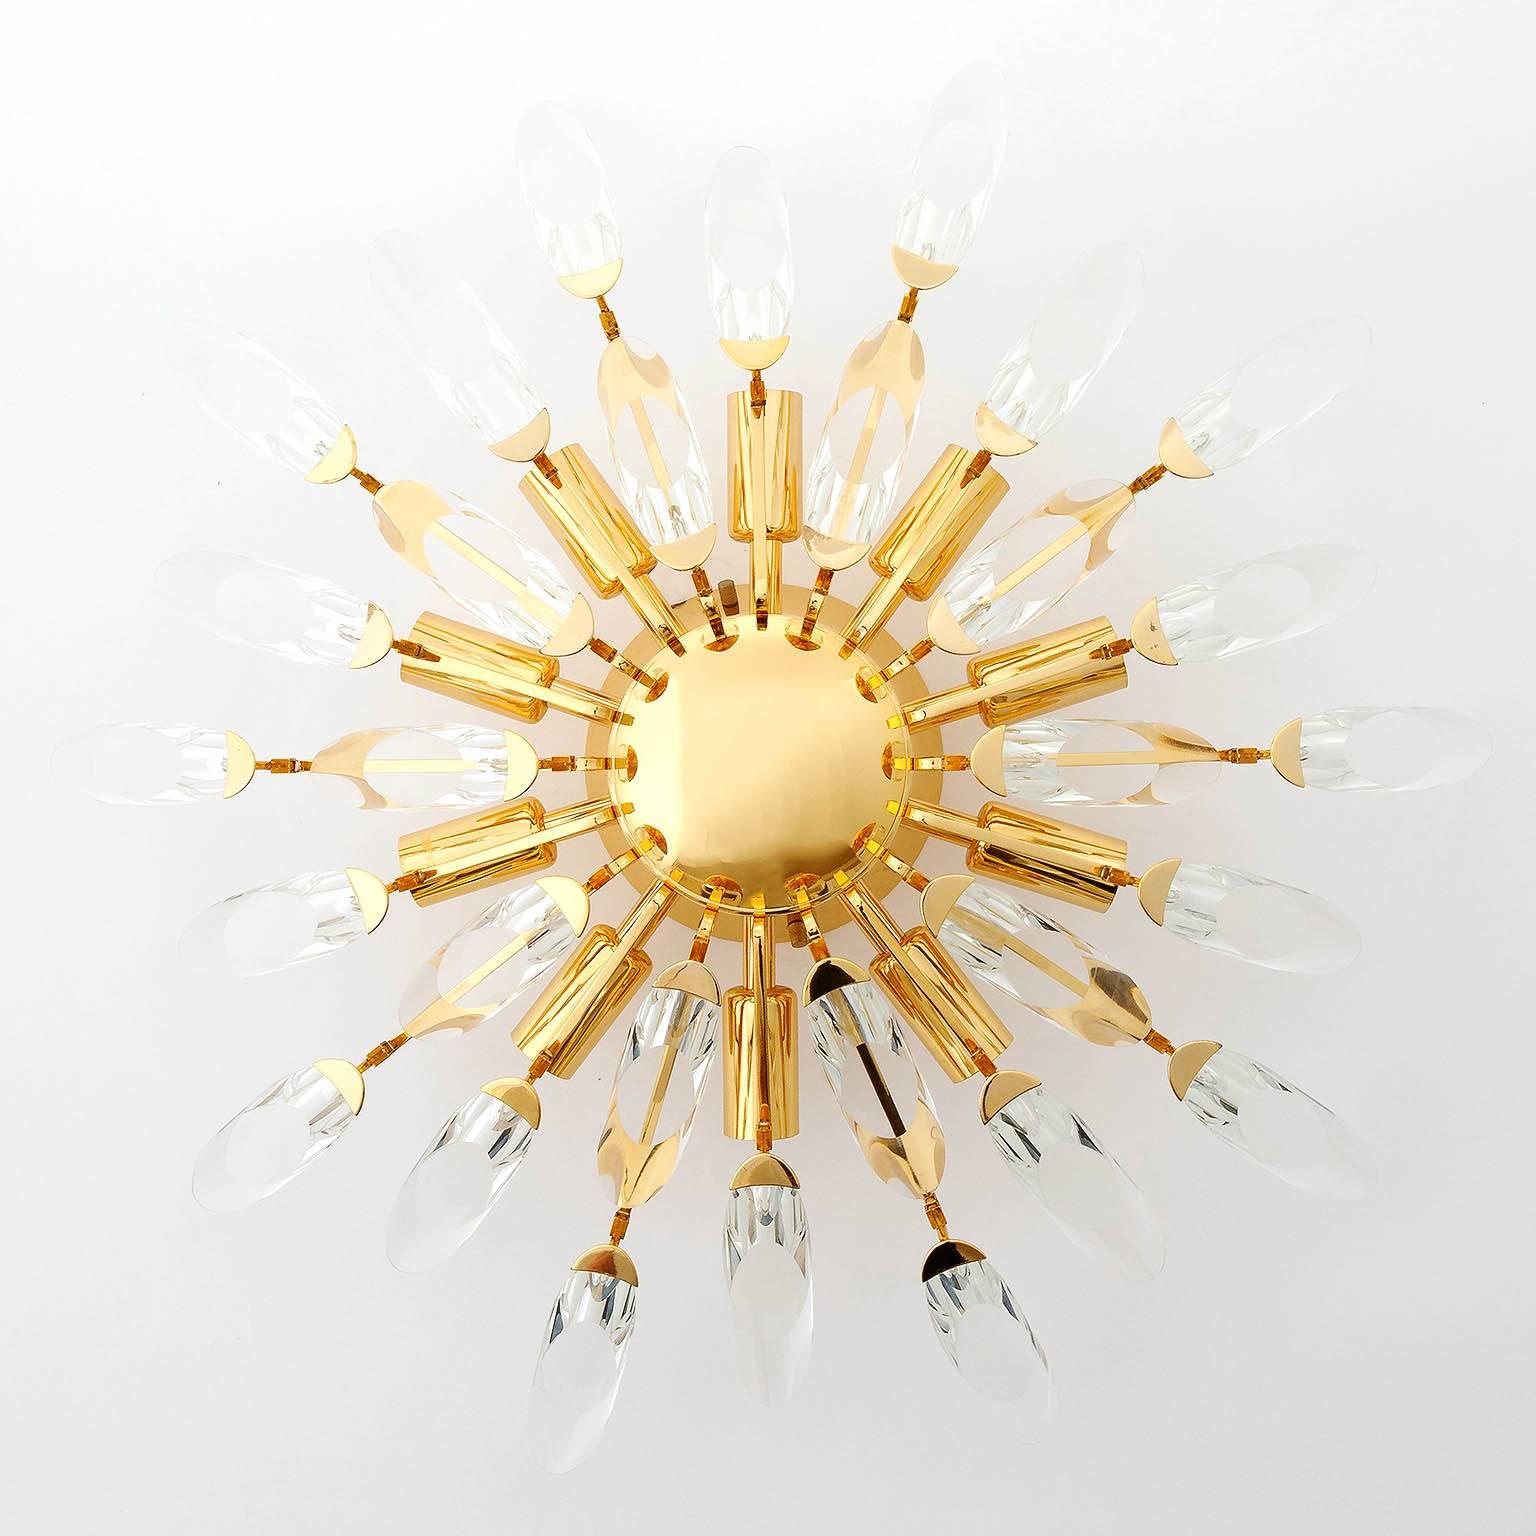 A fantastic ceiling light fixture by Stilkronen, Italy, manufactured in Mid-Century (1960s / 1970s). It is made of gold-plated brass with cut glasses.
It takes 10 small Edison screw base bulbs.